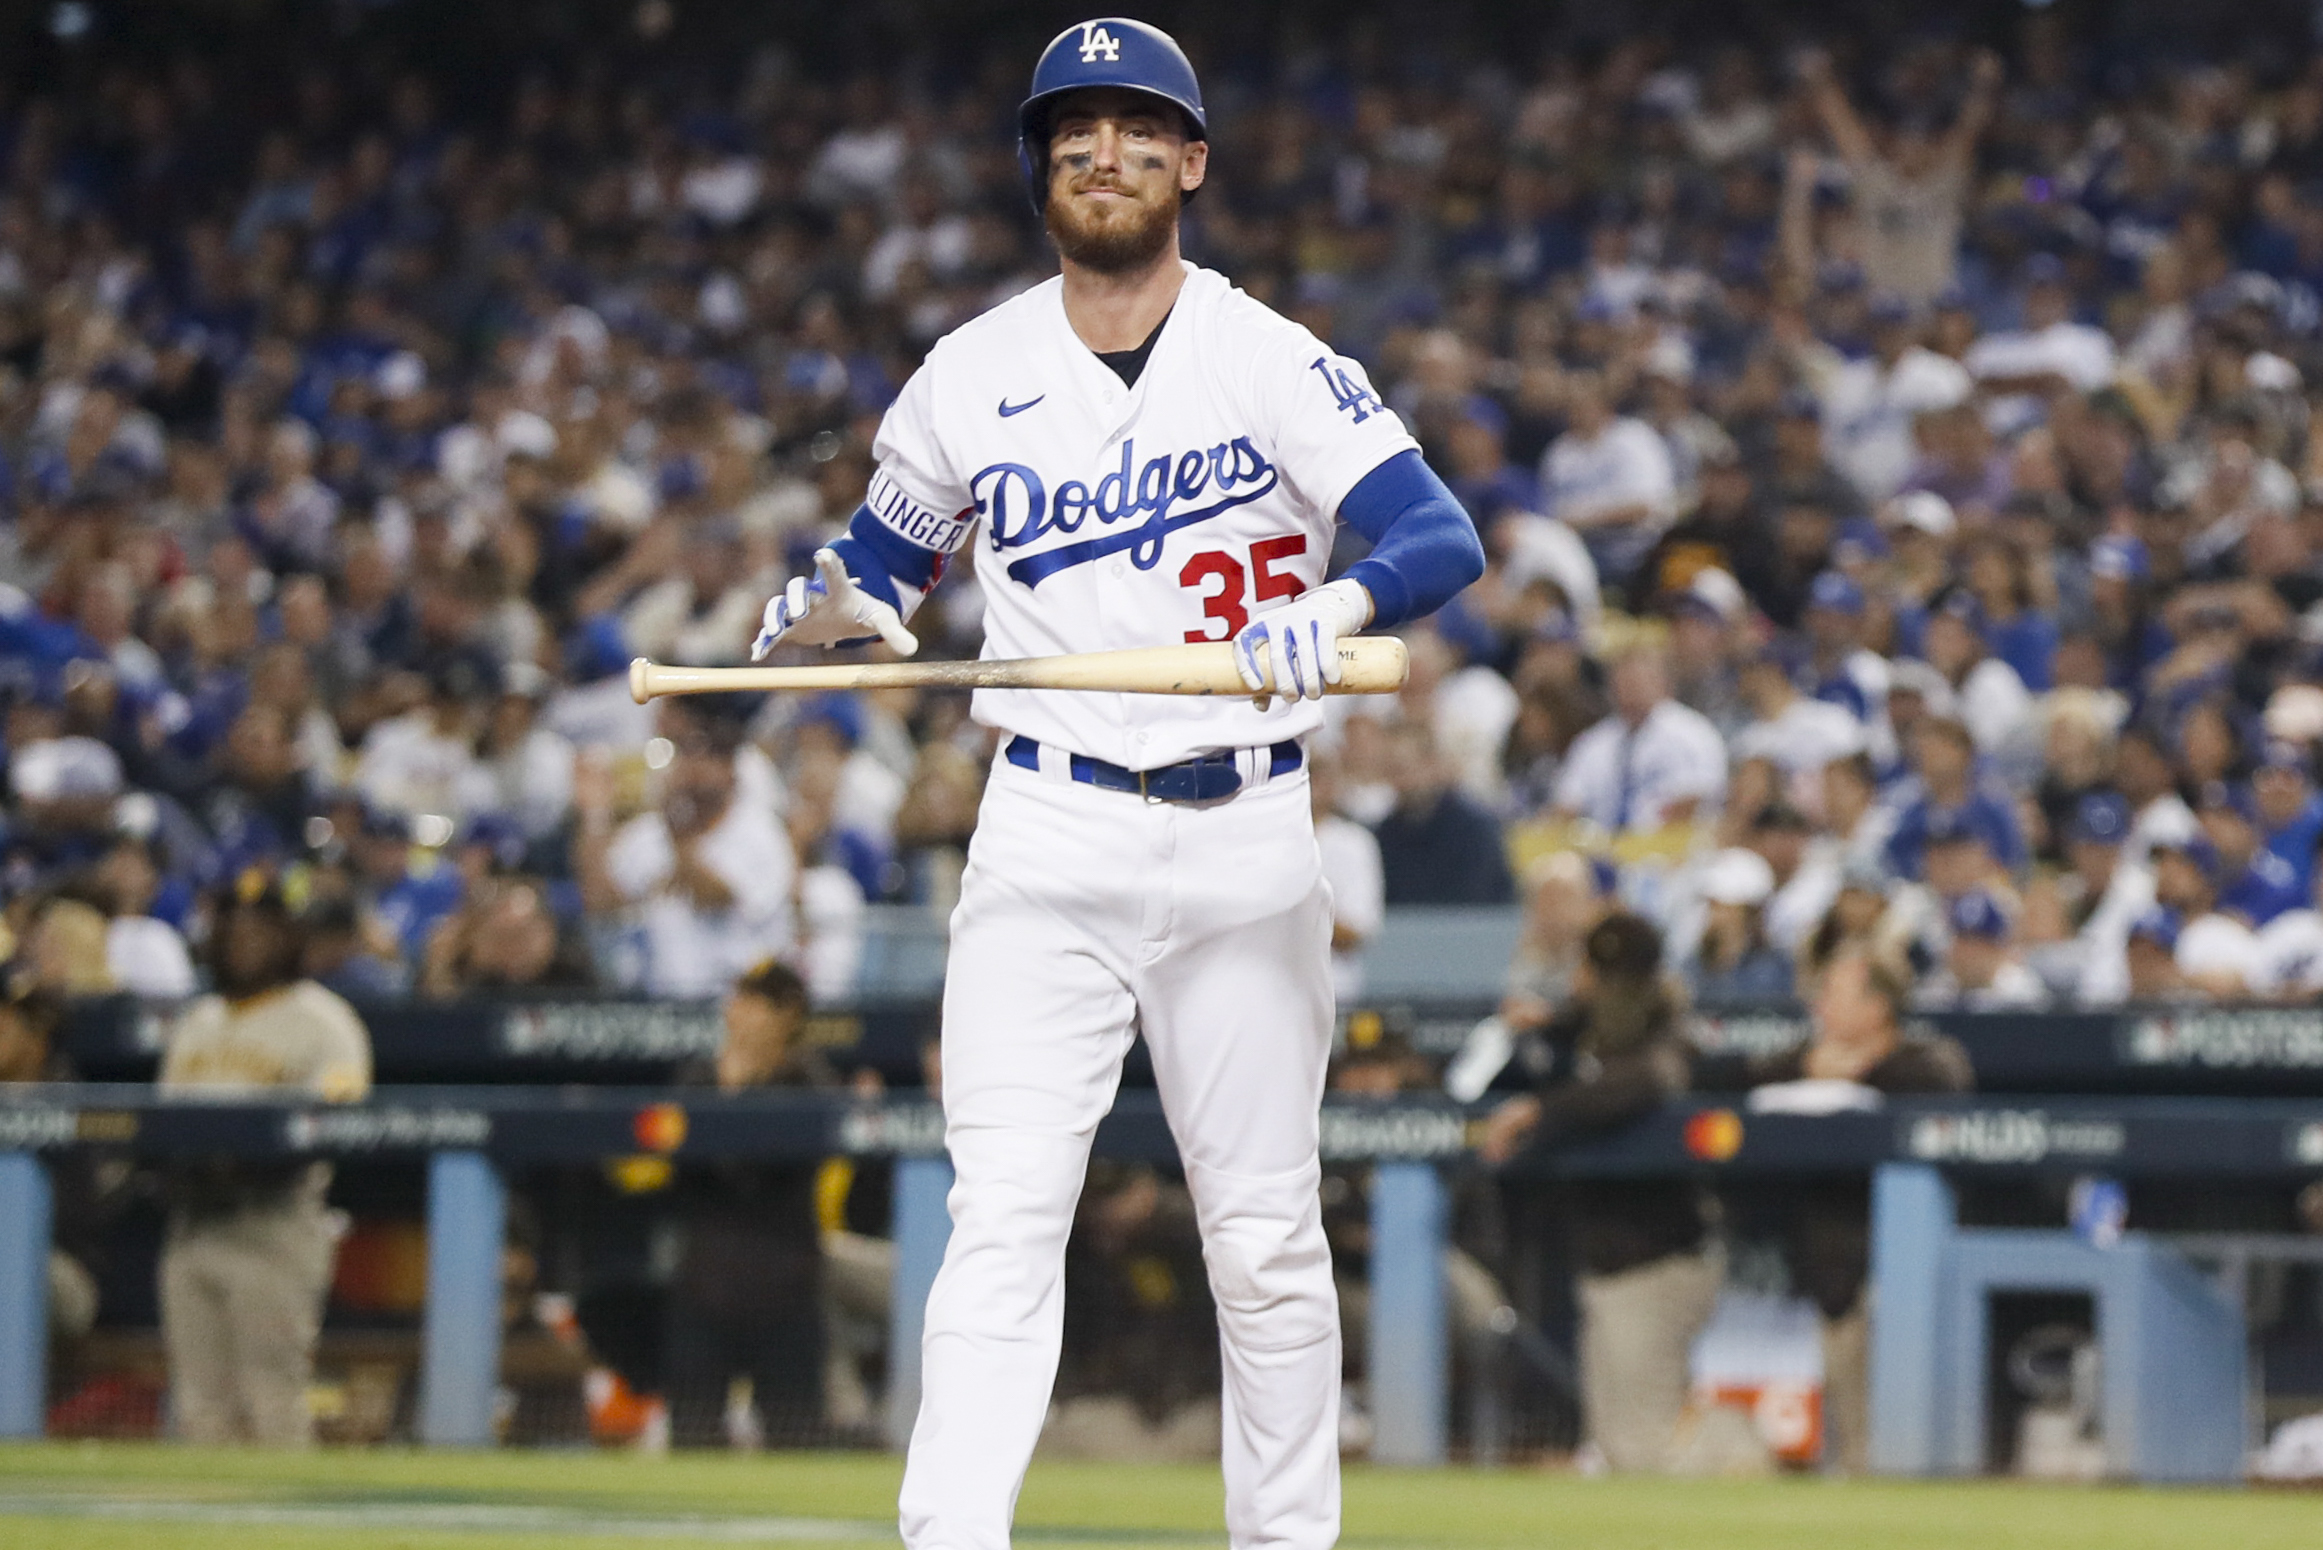 Bellinger has third most popular MLB player jersey of 2019, by Rowan  Kavner